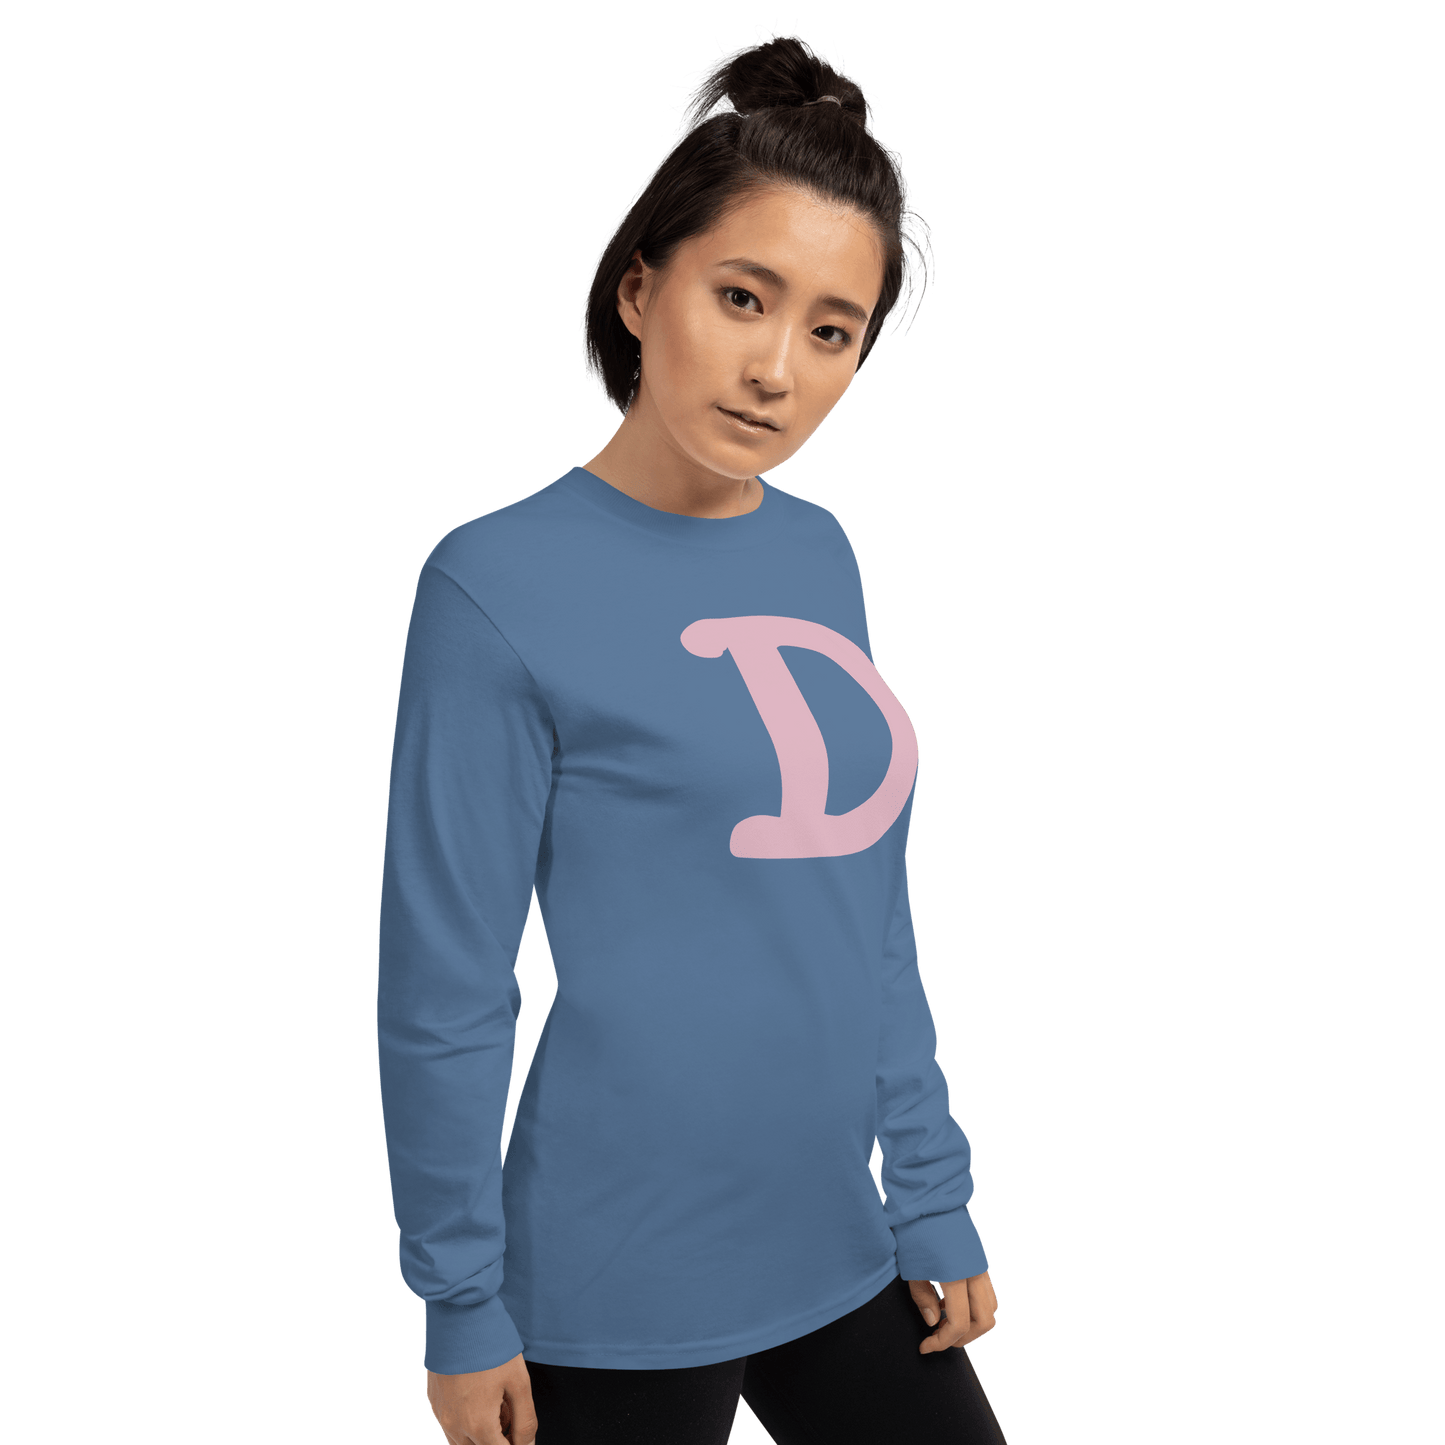 Detroit 'Old French D' T-Shirt (Pink Full Body Outline) | Unisex Long Sleeve - Circumspice Michigan